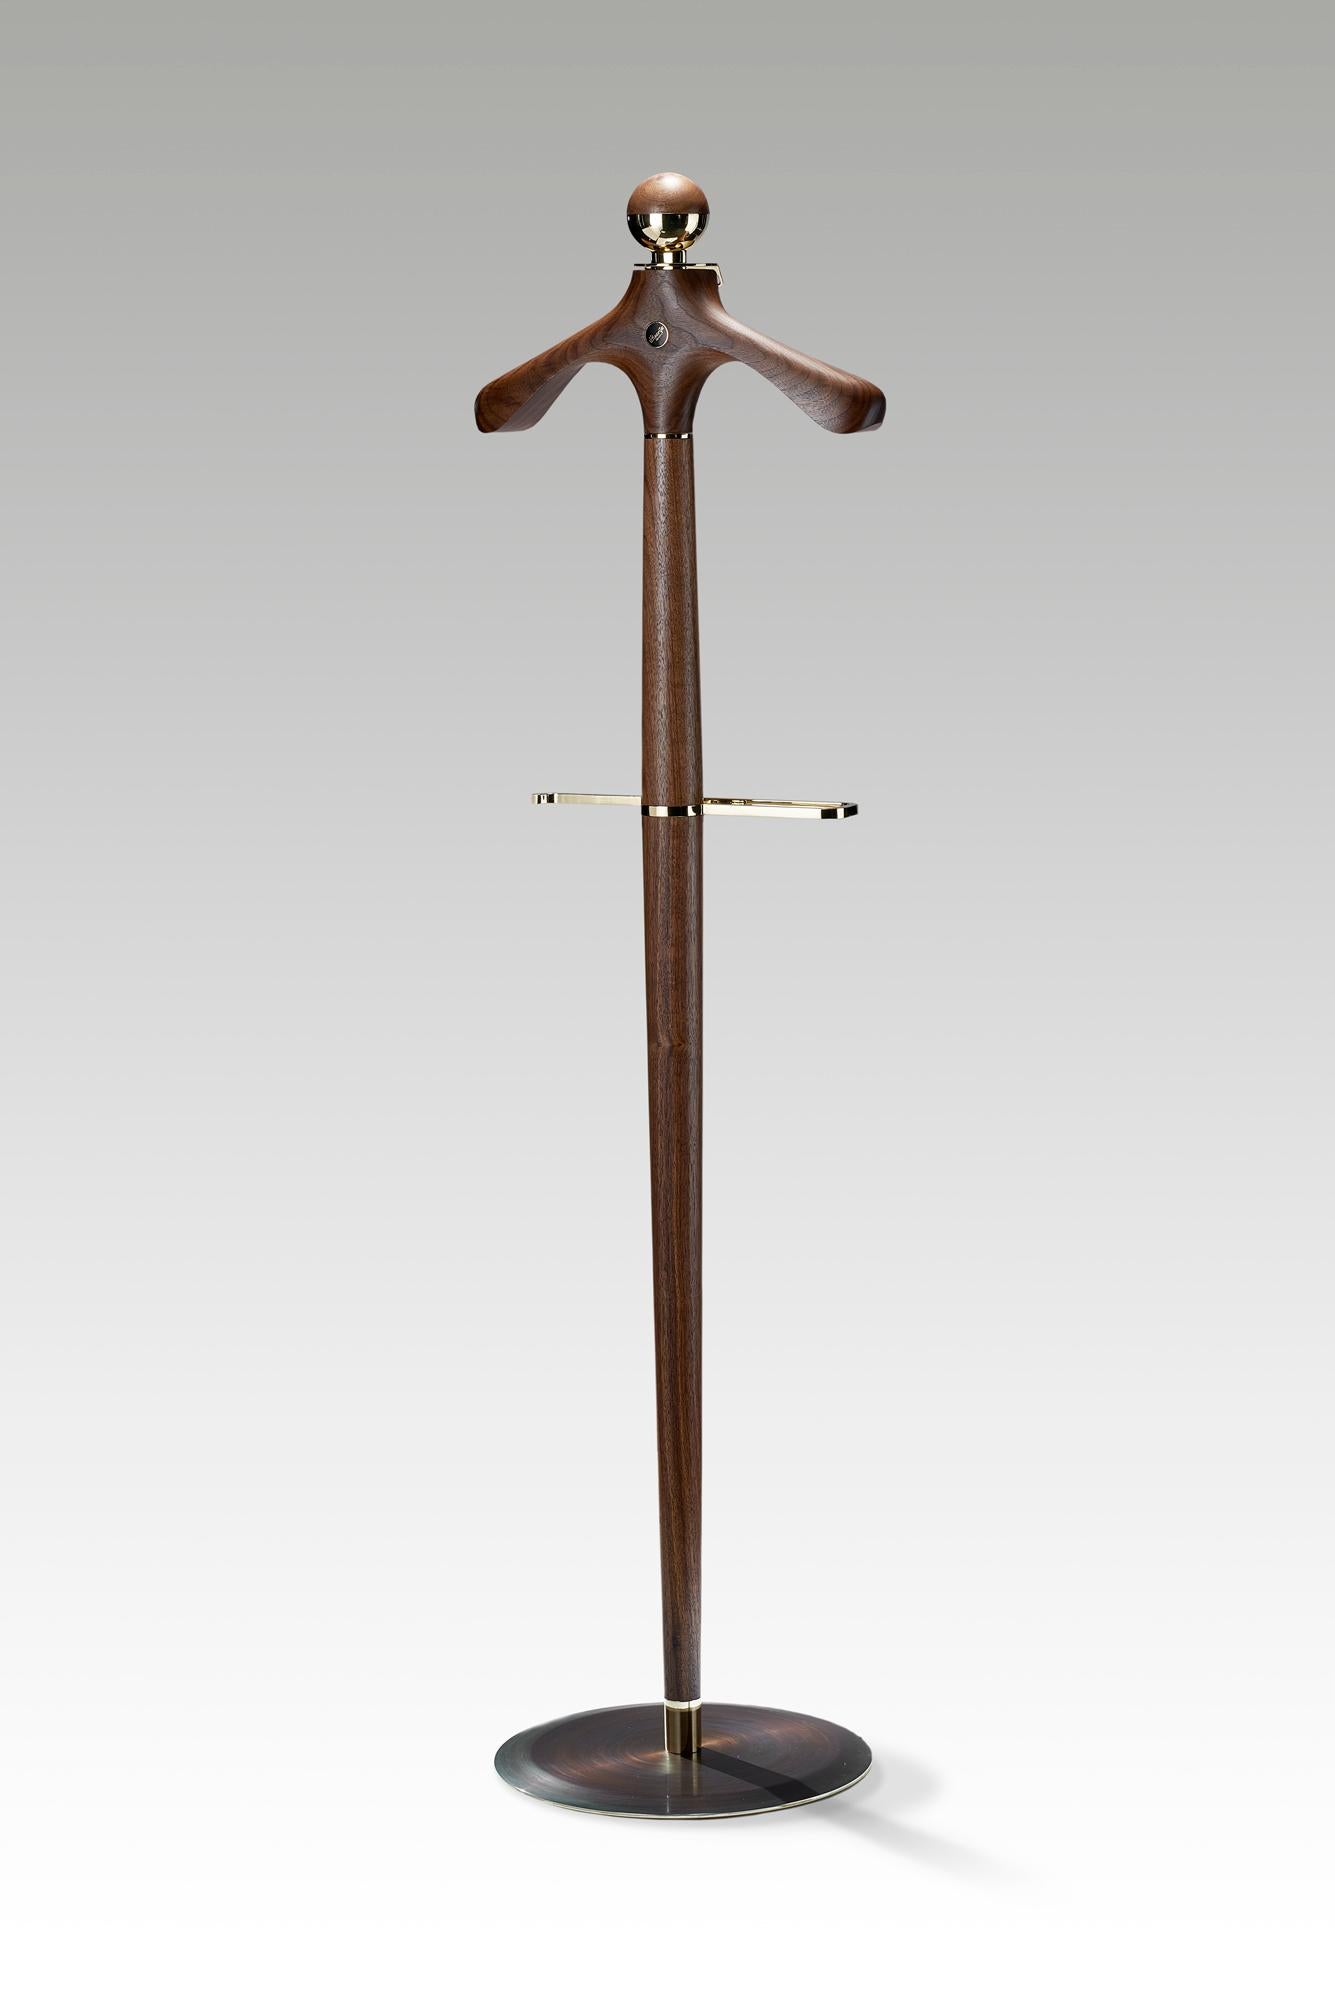 The Essential valet stand preserves all the finest features of our series of products and provides new uses while saving space at home or in the office.

On this piece, which has become our calling card, you find a coat hanger sculpted from a